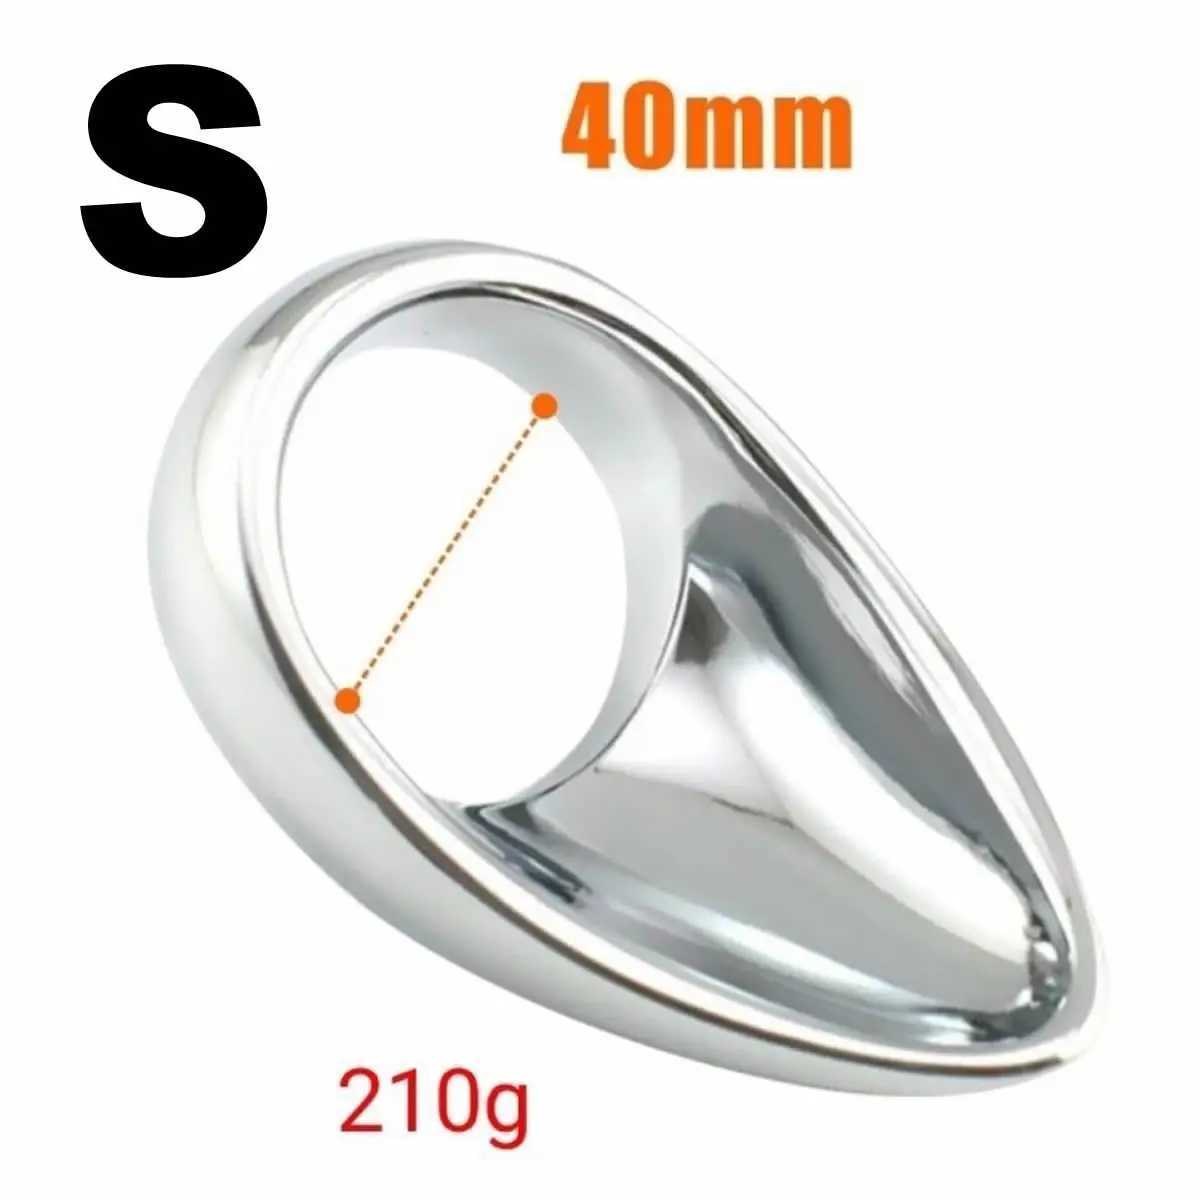 NXY COCKRINGS Metal Tears Cock Anneau Longue Forme Penis Dildo Cage Ball Sex Toys for Men Adult Product Chardedrop BDSM Areil inoxydable 240427